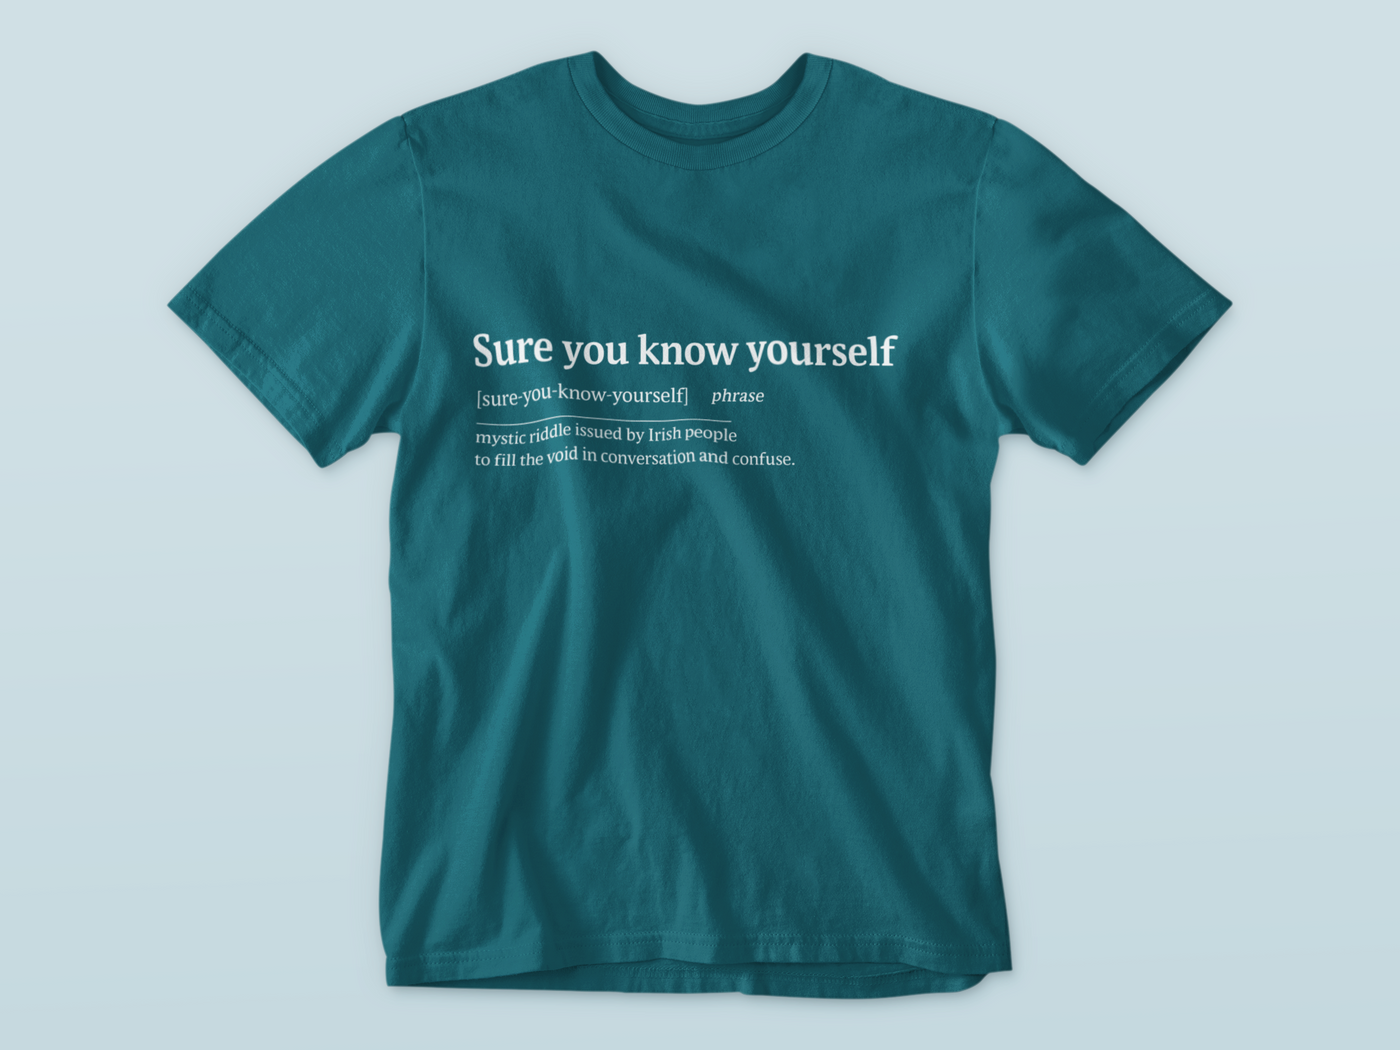 Sure you know yourself - Premium WWN T-shirt